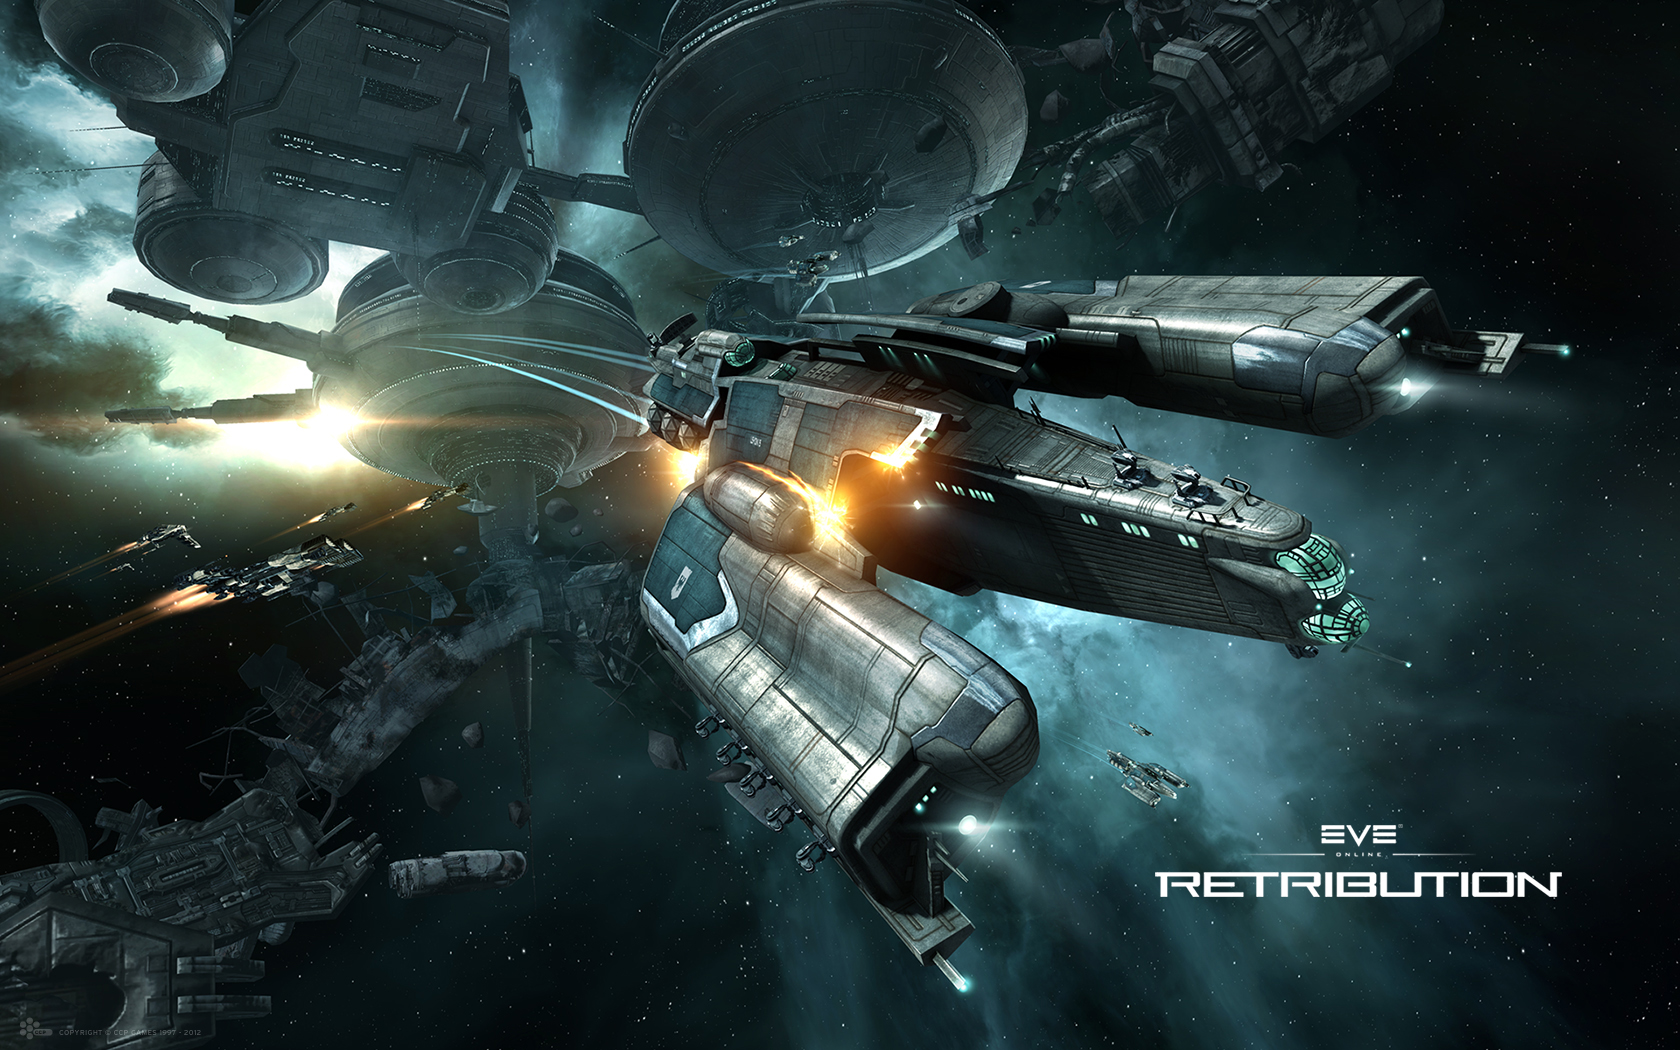 Eve Online 14340 1920x1200 px